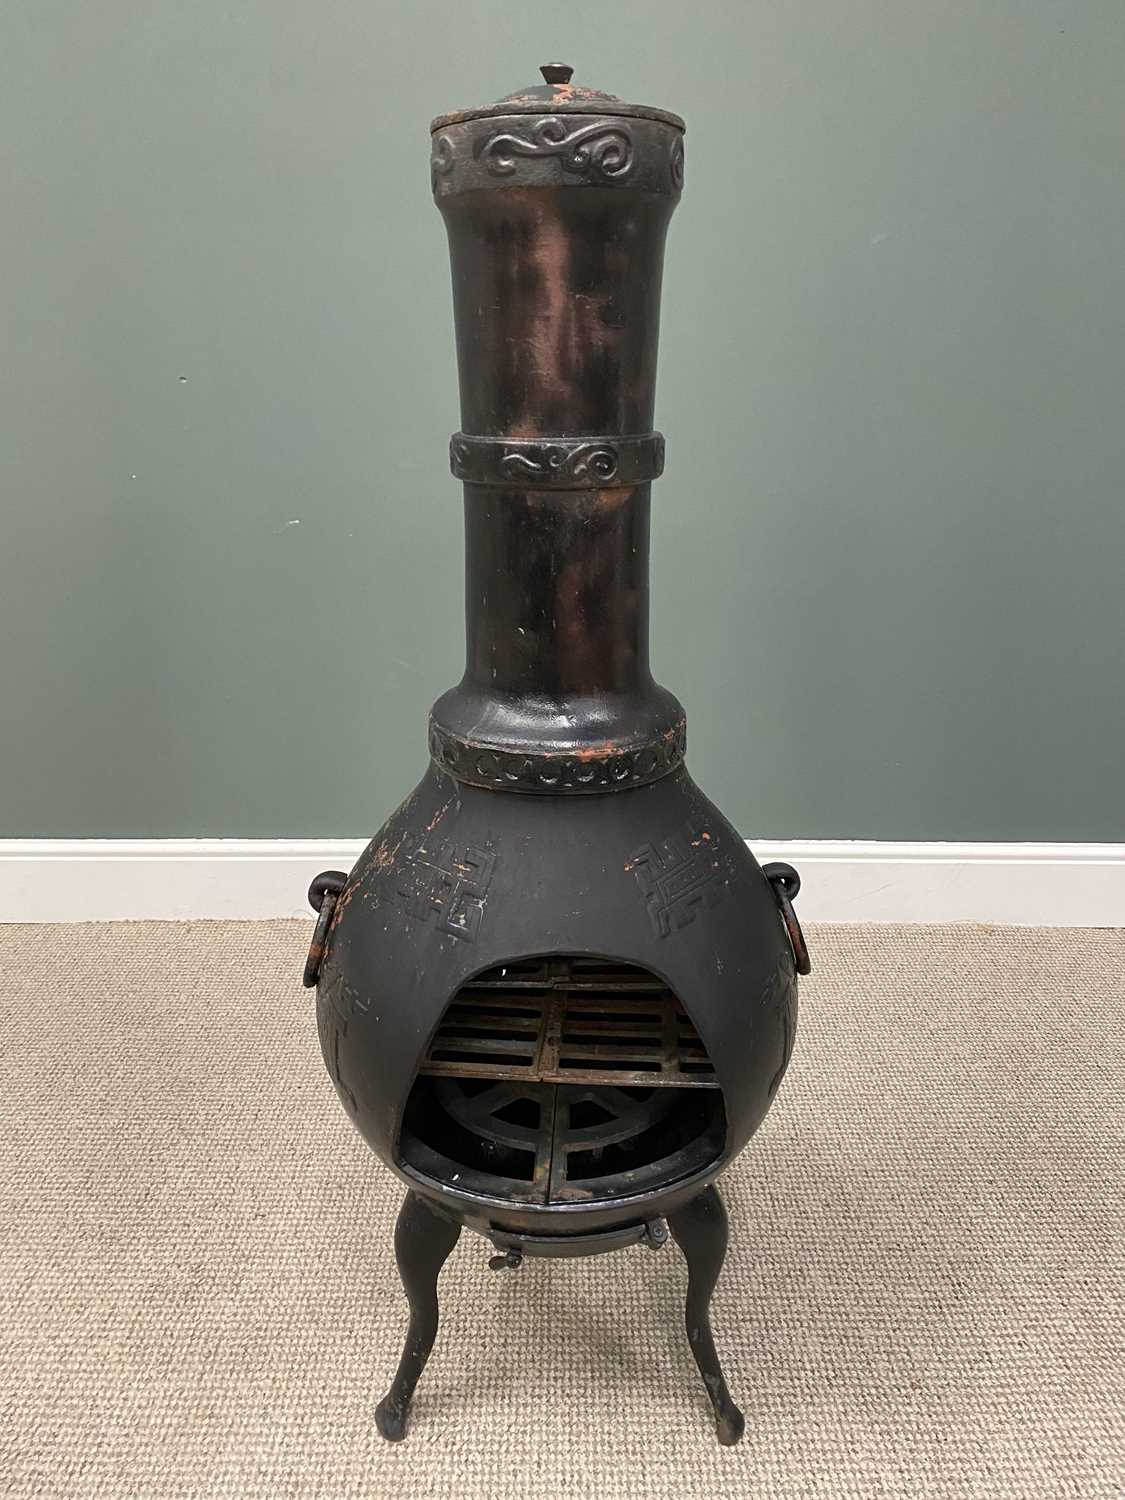 CAST IRON GARDEN CHIMINEA FIREPLACE with Oriental-style decoration in relief and ring side